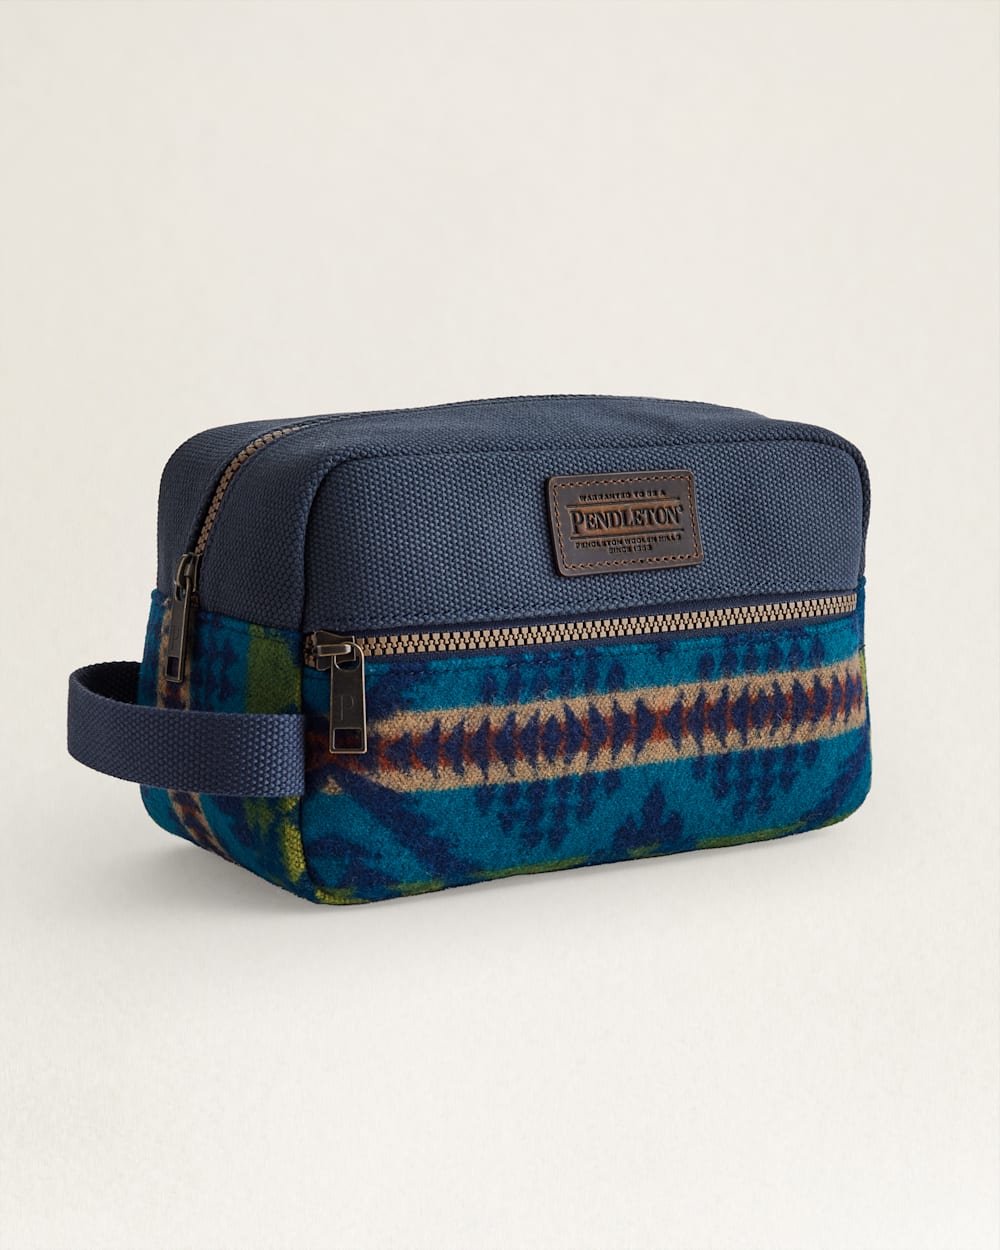 ALTERNATE VIEW OF DIAMOND DESERT CARRYALL POUCH IN BLUE MULTI image number 2